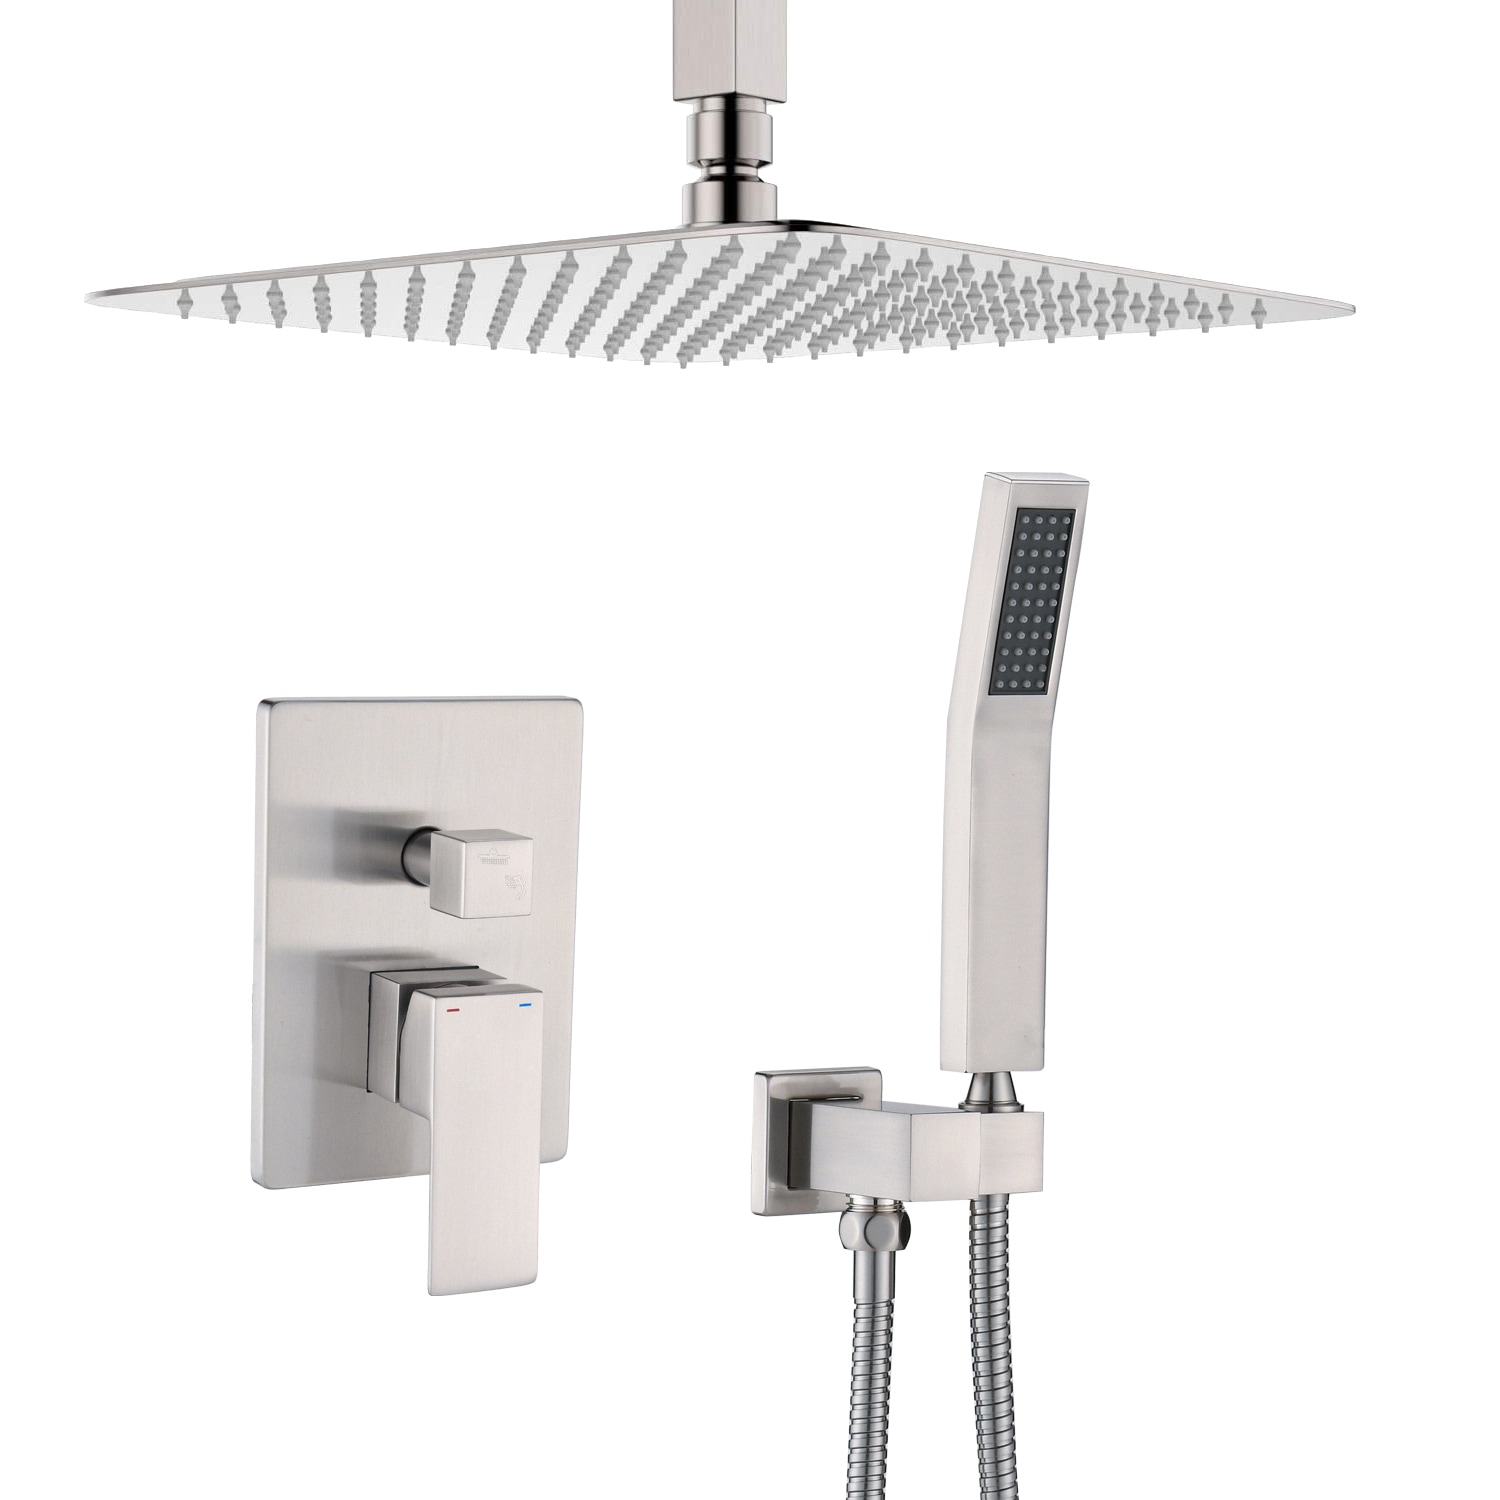 Brushed Nickel Shower Faucet Set Ceil Mounted 16" Rainfall Head with mixer Valve 